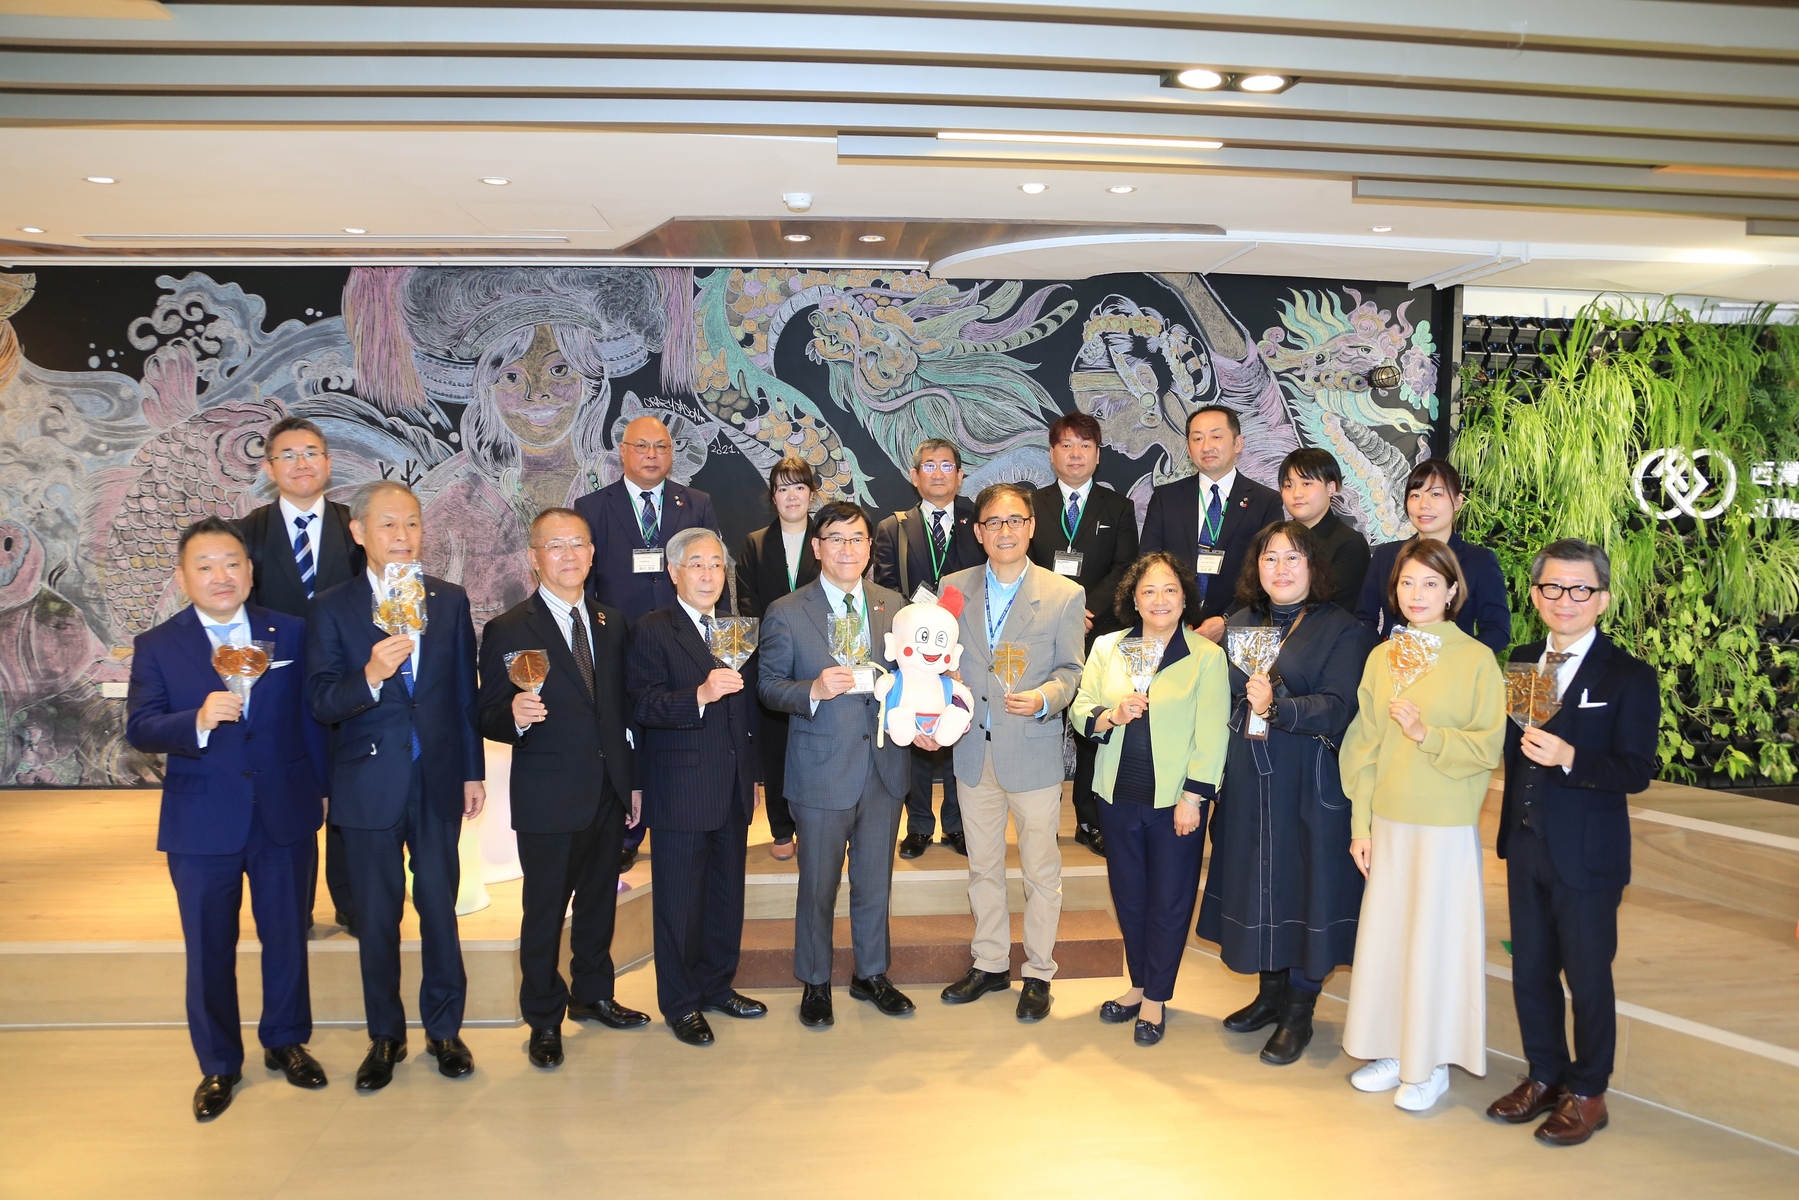 Masayuki Hayashi, the mayor of the Himi City of Toyama Prefecture in Japan, led the Himi City Government, civil society organizations, and business representatives to visit NSYSU Si Wan College